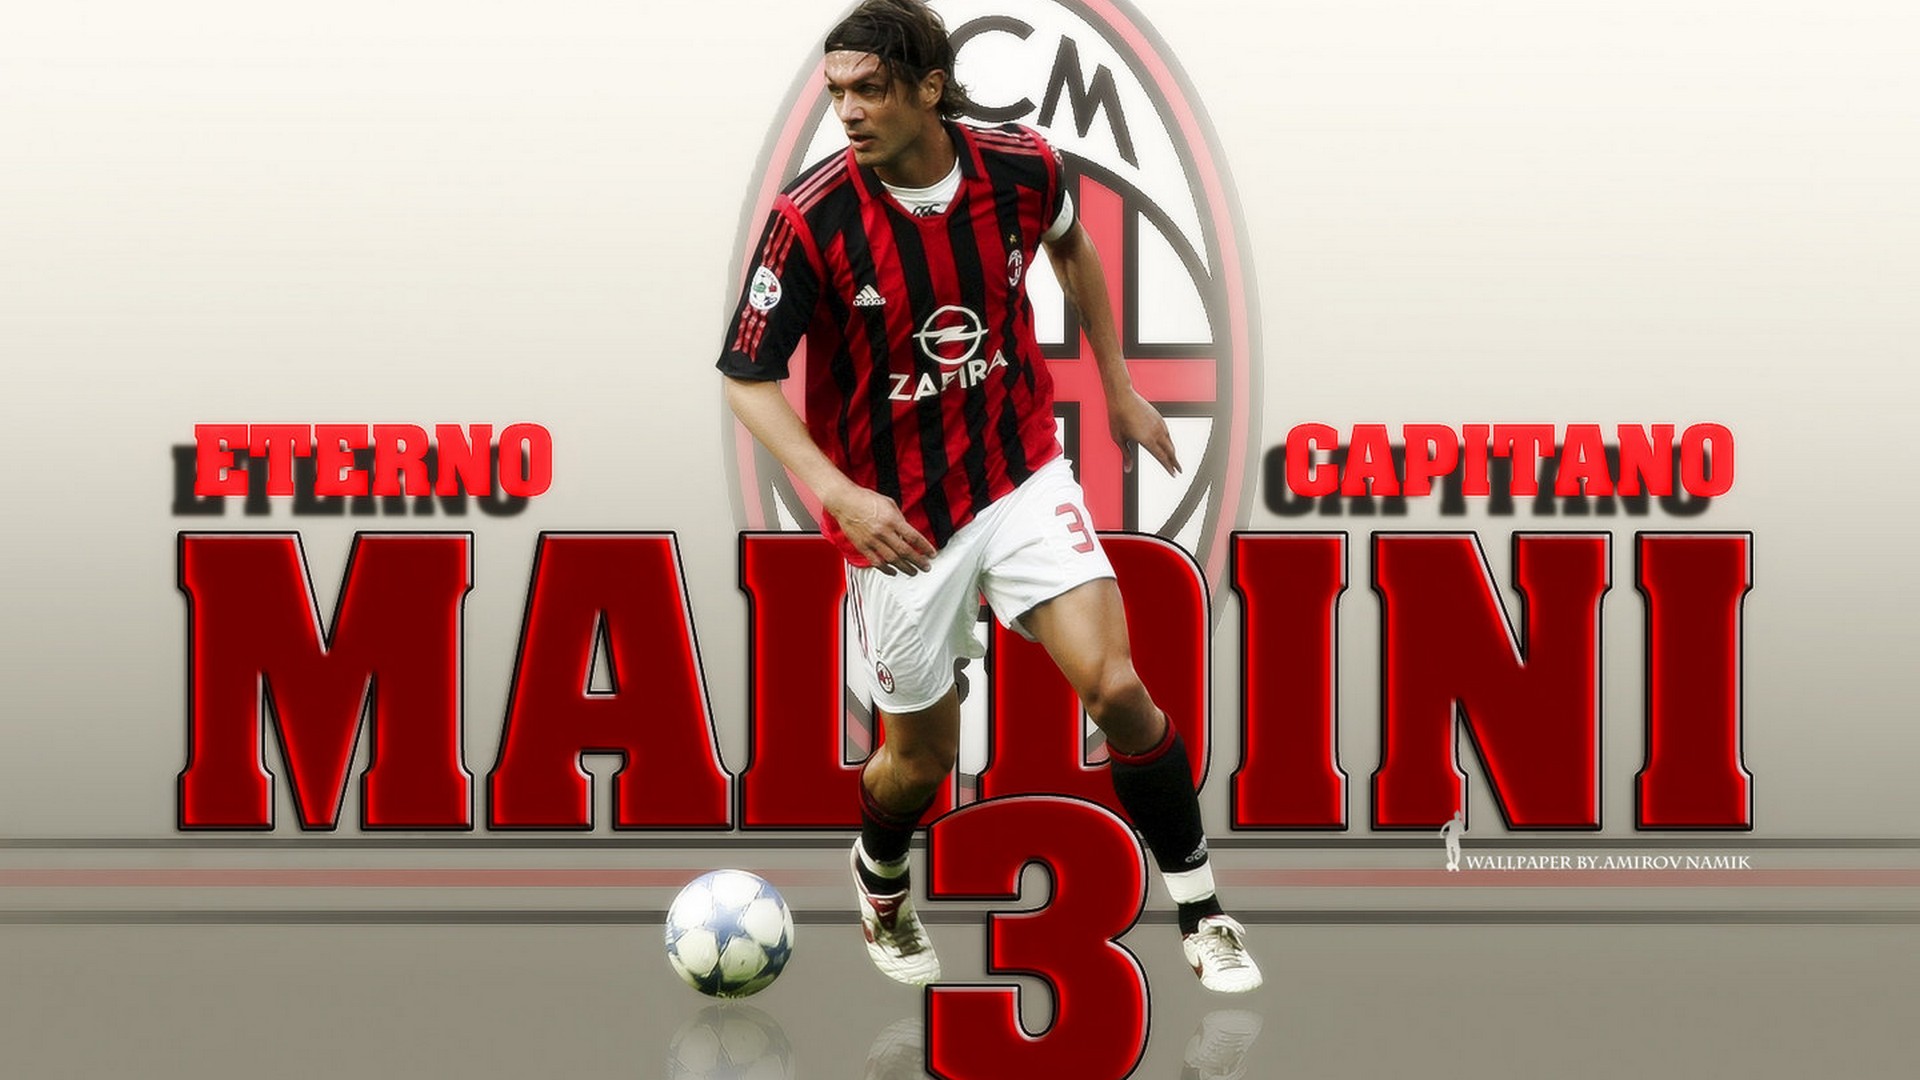 AC Milan Legends Wallpaper HD With high-resolution 1920X1080 pixel. You can use this wallpaper for your Desktop Computers, Mac Screensavers, Windows Backgrounds, iPhone Wallpapers, Tablet or Android Lock screen and another Mobile device